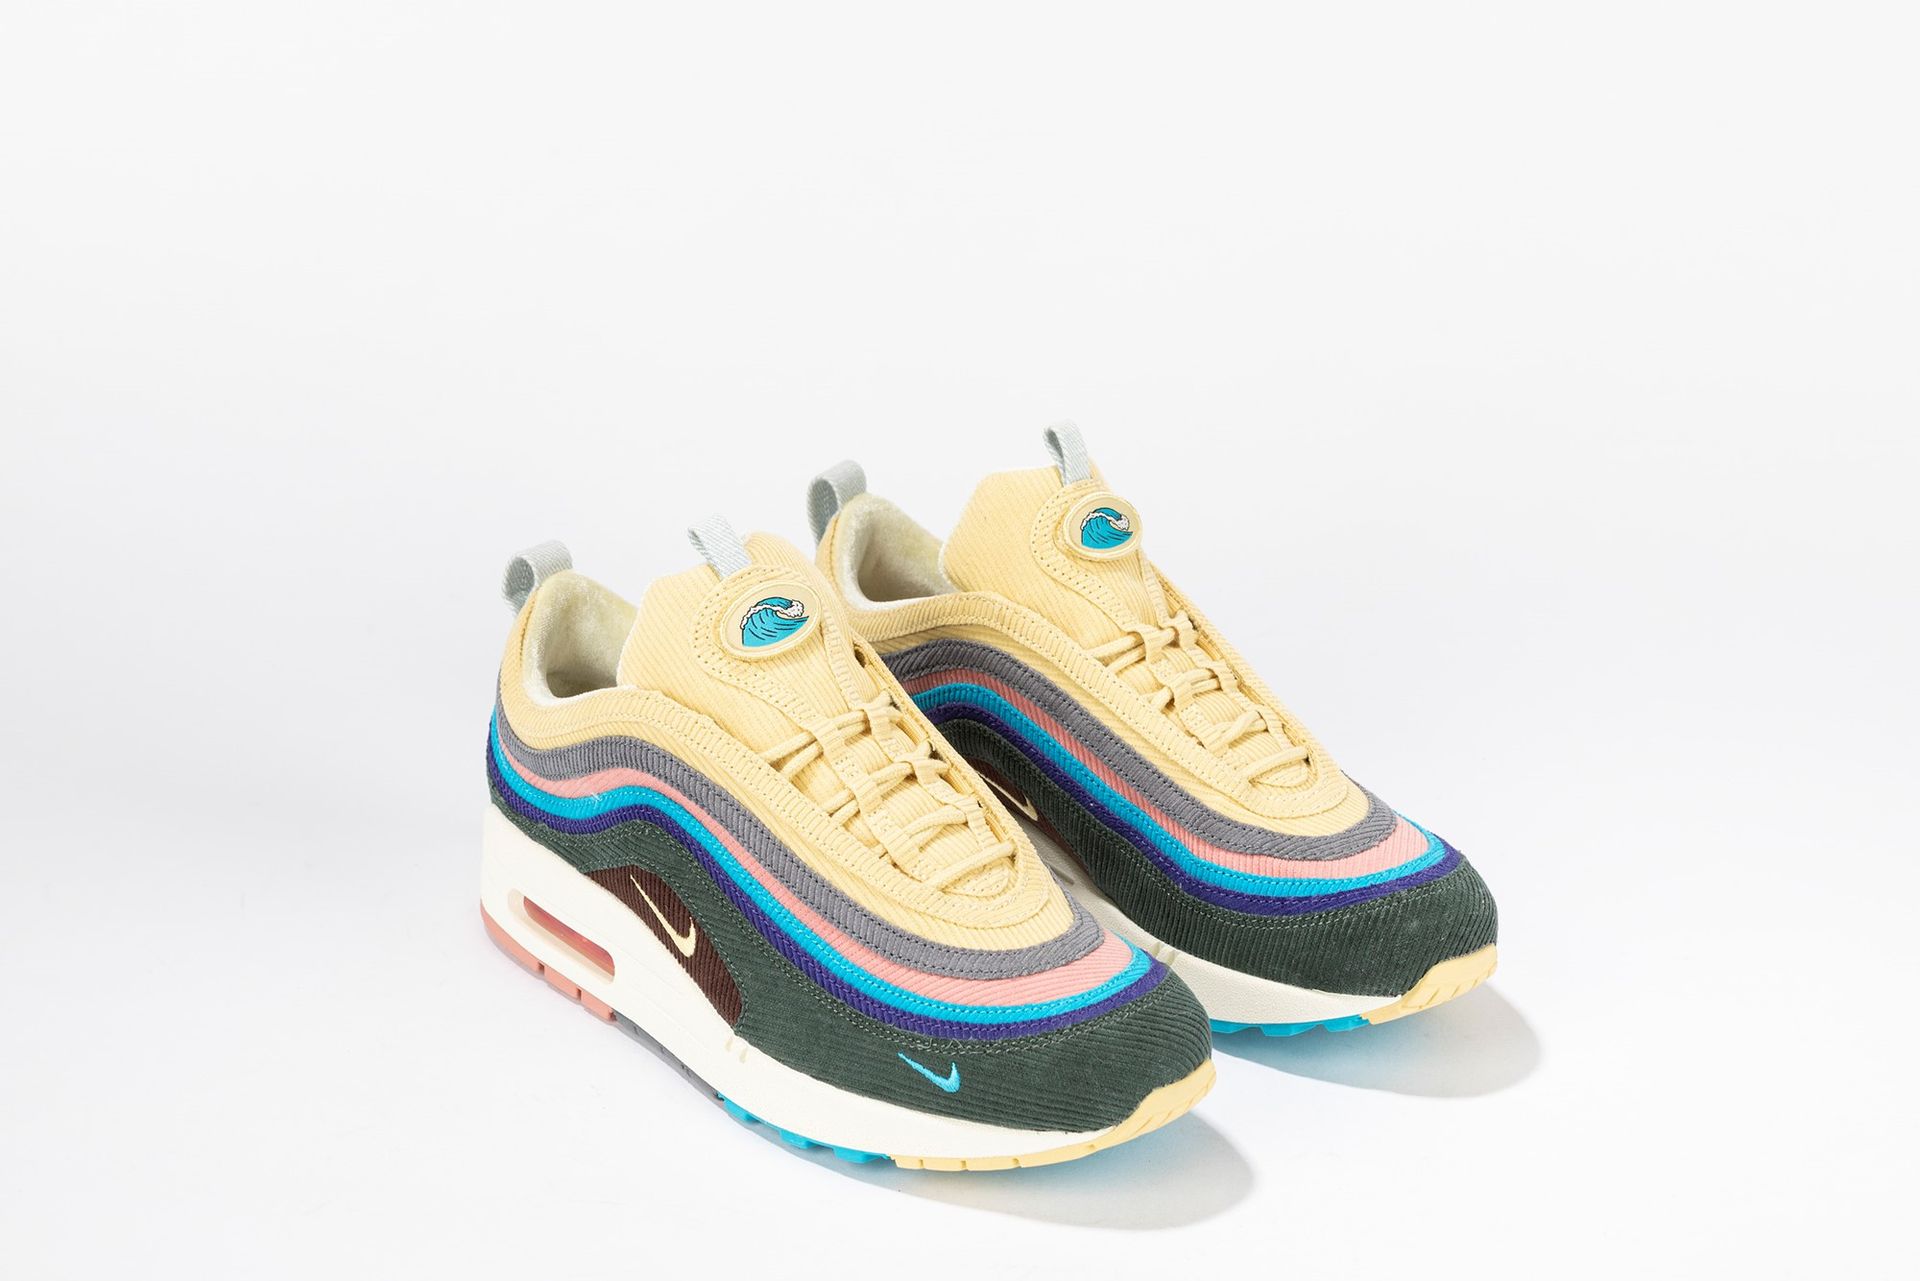 NIKE Air Max 1/97 Sean Wotherspoon | Size US 7 EUR 40, 2018

The Nike Air Max 1/&hellip;